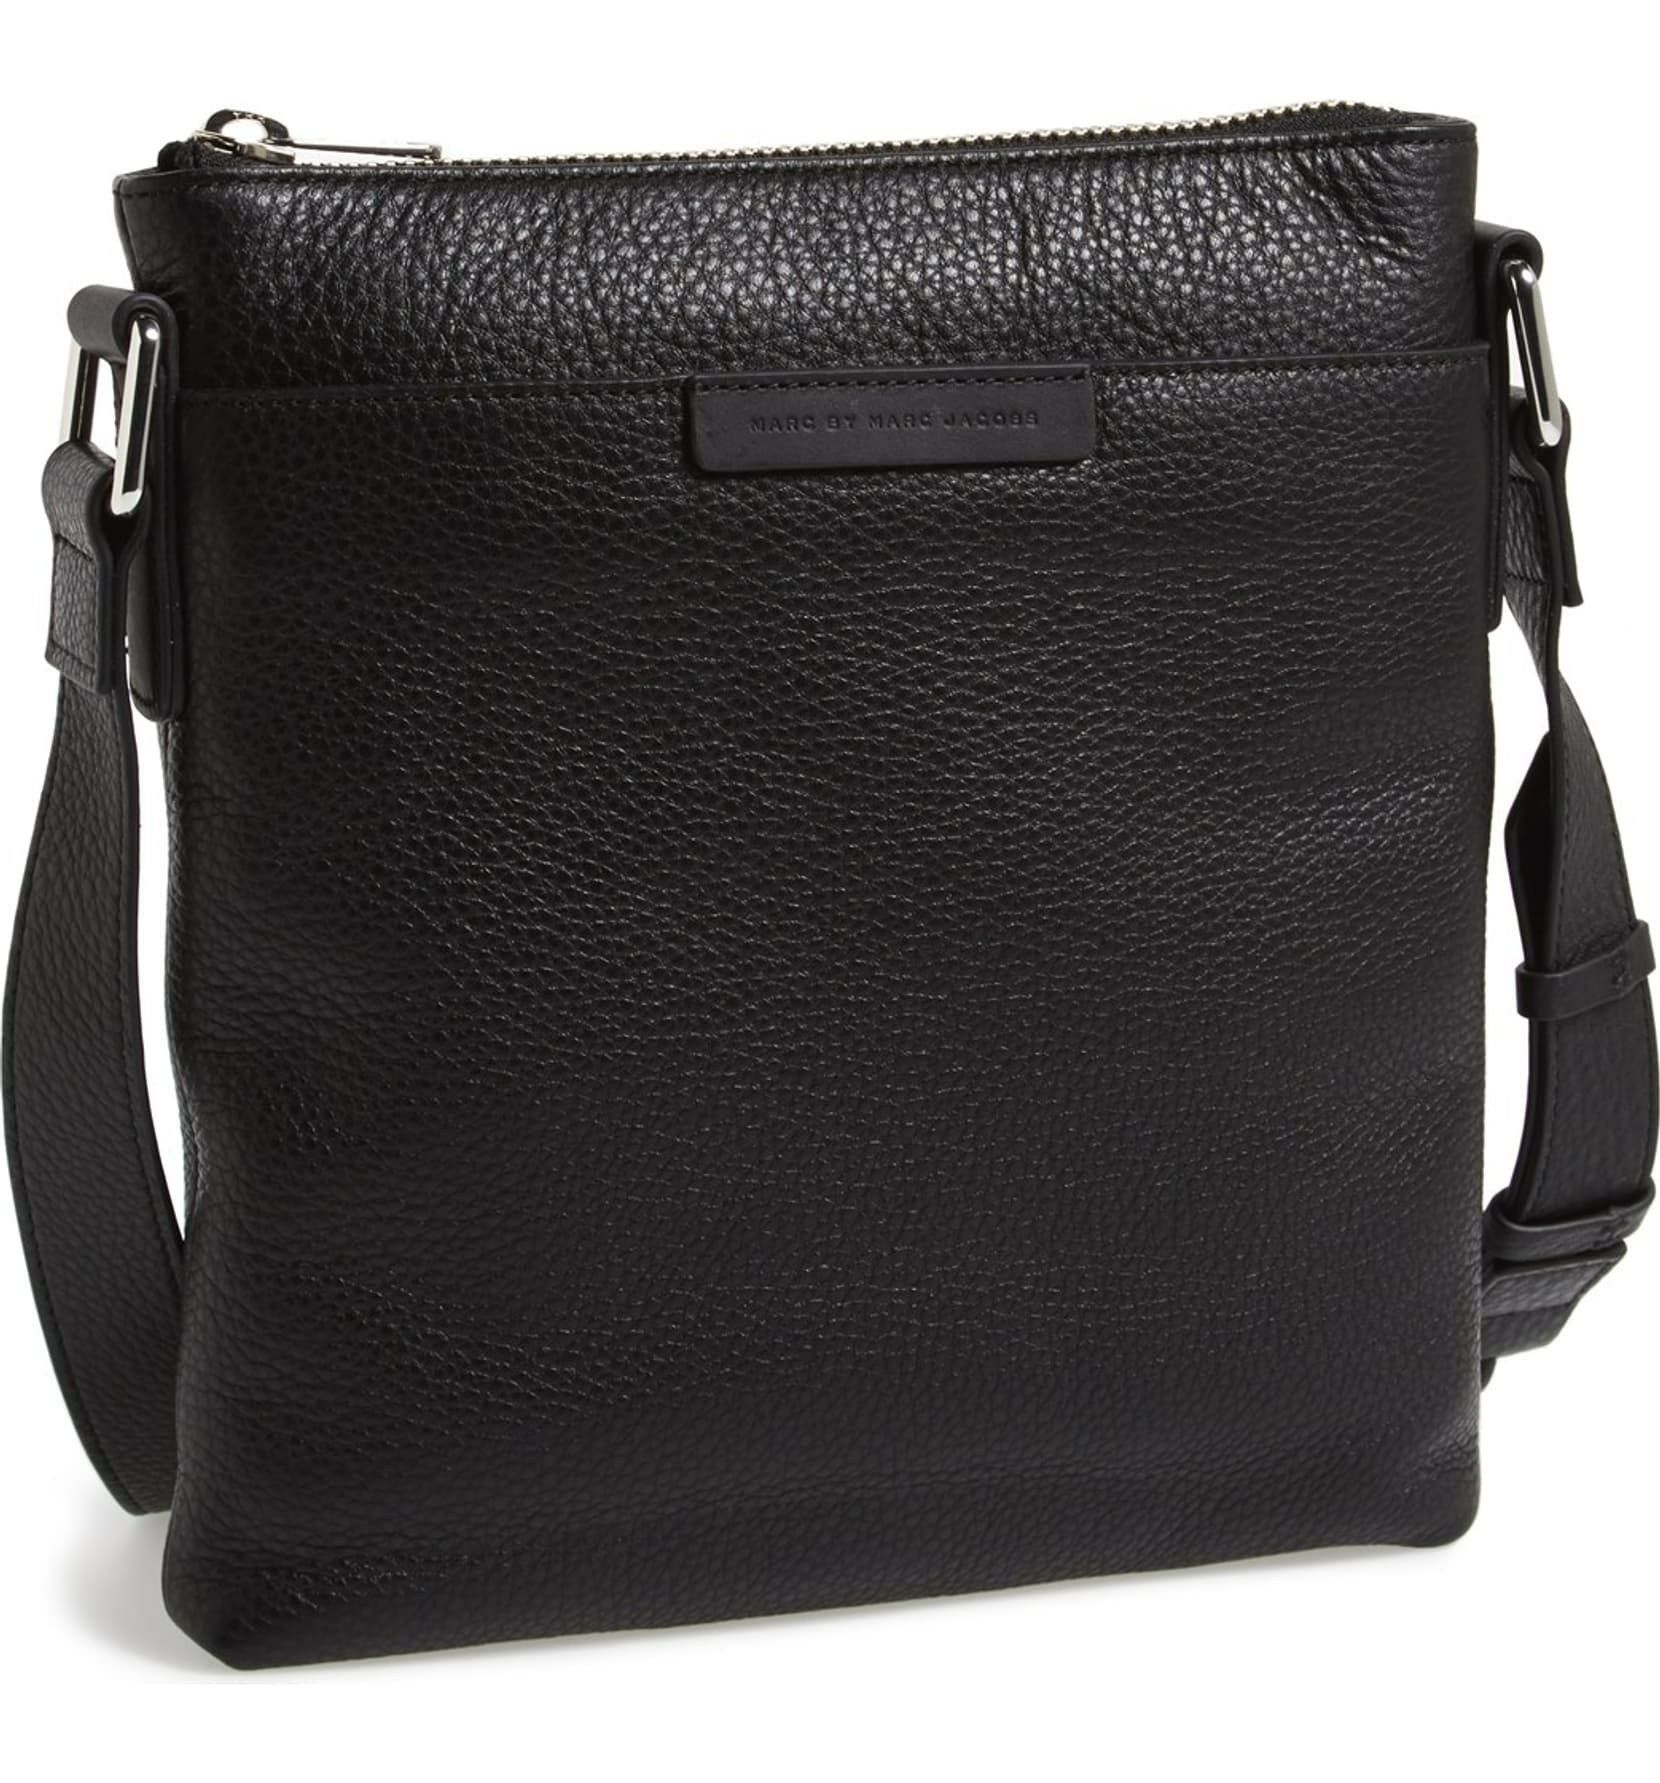 Marc by Marc Jacobs classic messenger bag